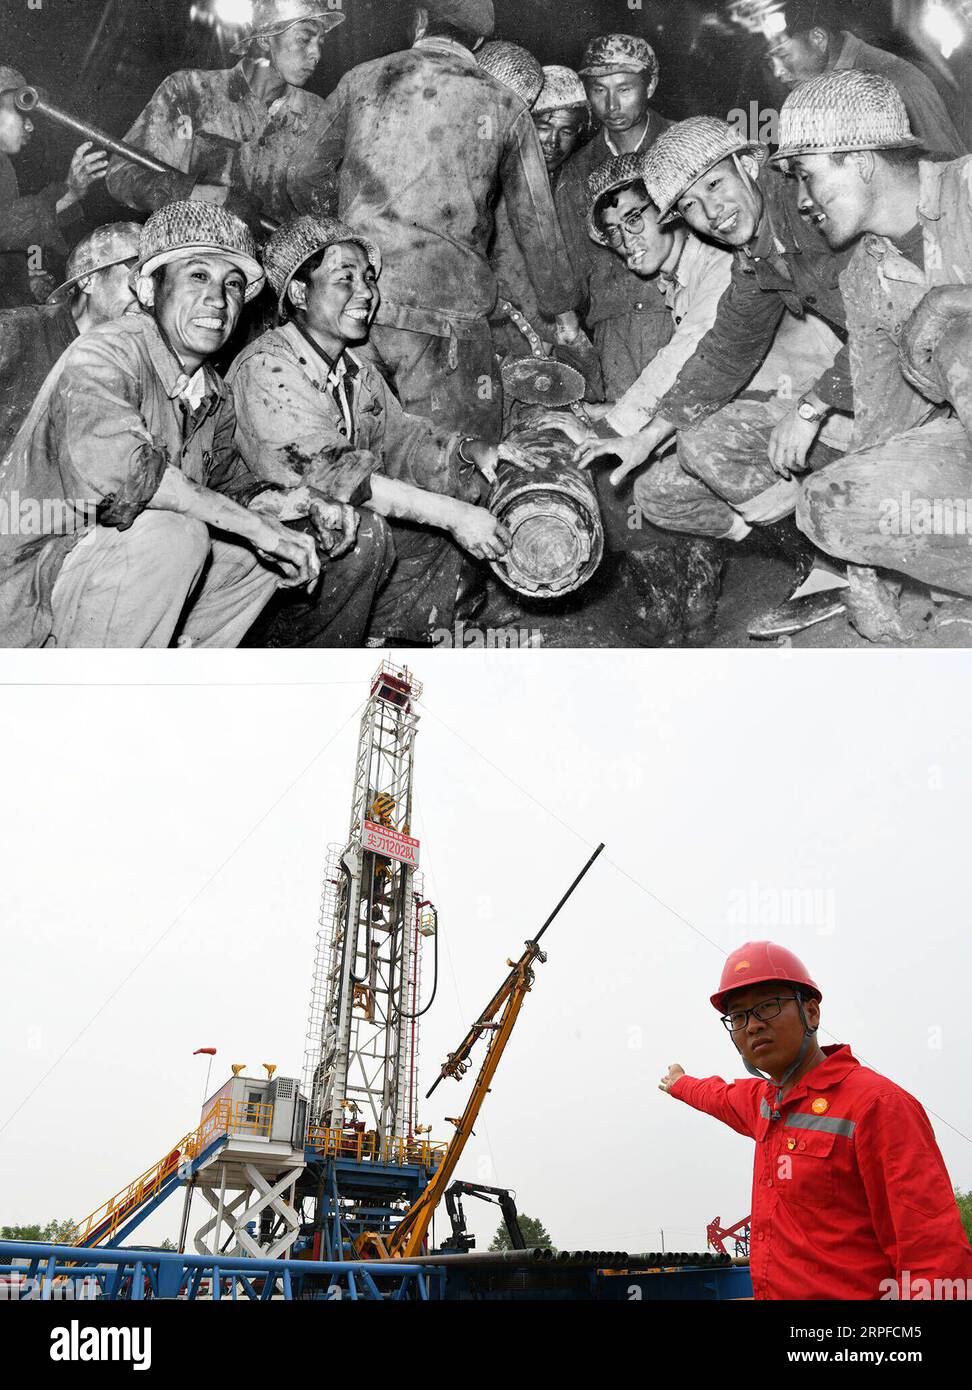 190921 -- BEIJING, Sept. 21, 2019 -- Top: File photo taken in 1965 shows oil workers taking out a long rock core for the first time in Daqing, northeast China s Heilongjiang Province. Bottom: Photo taken on June 26, 2019 by shows Jiang Hongwei of No. 1202 drilling team introducing an advanced drill in use at Daqing Oilfield. Nowadays, workers can realize fast and efficient operation in drilling control rooms with the upgrade of mechanization and automation level. In 1949 when the People s Republic of China was founded, the Chinese people faced a devastated country that needed to be rebuilt fro Stock Photo